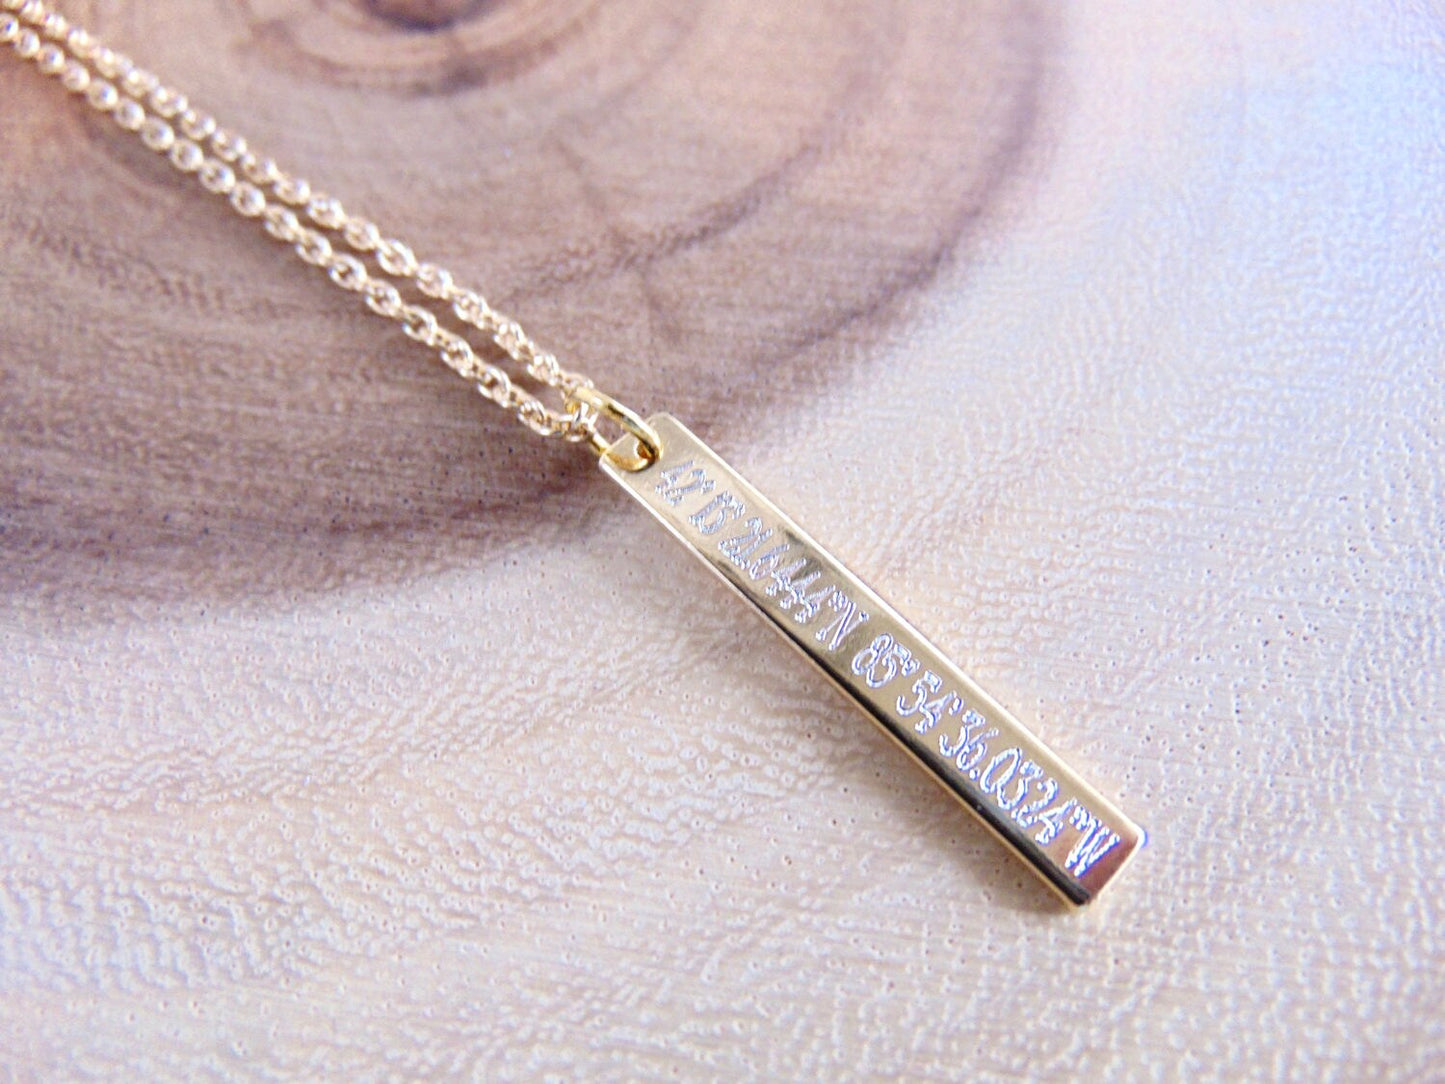 Custom Geographic Coordinates Necklace with Engraved Latitude Longitude, Personalized GPS location, coordinate point Vertical bar necklace